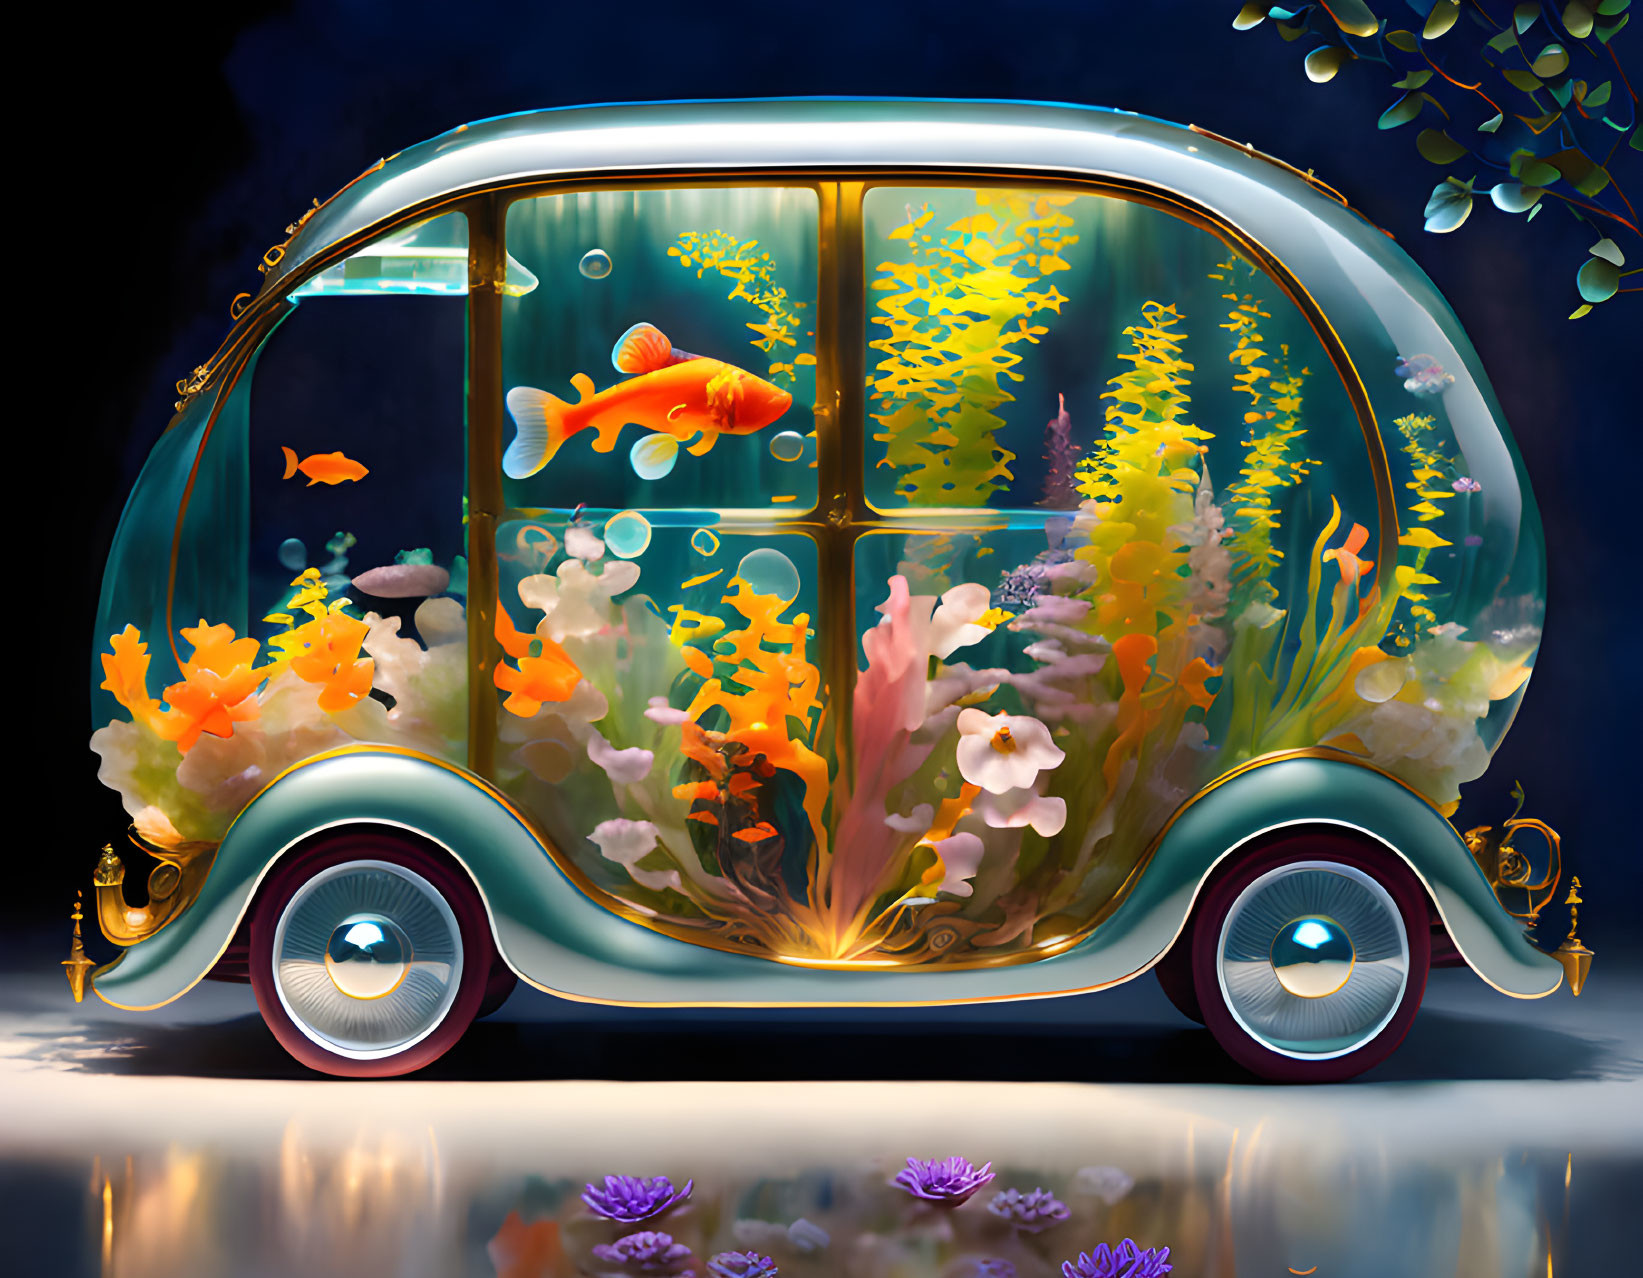 Water-powered car for goldfish